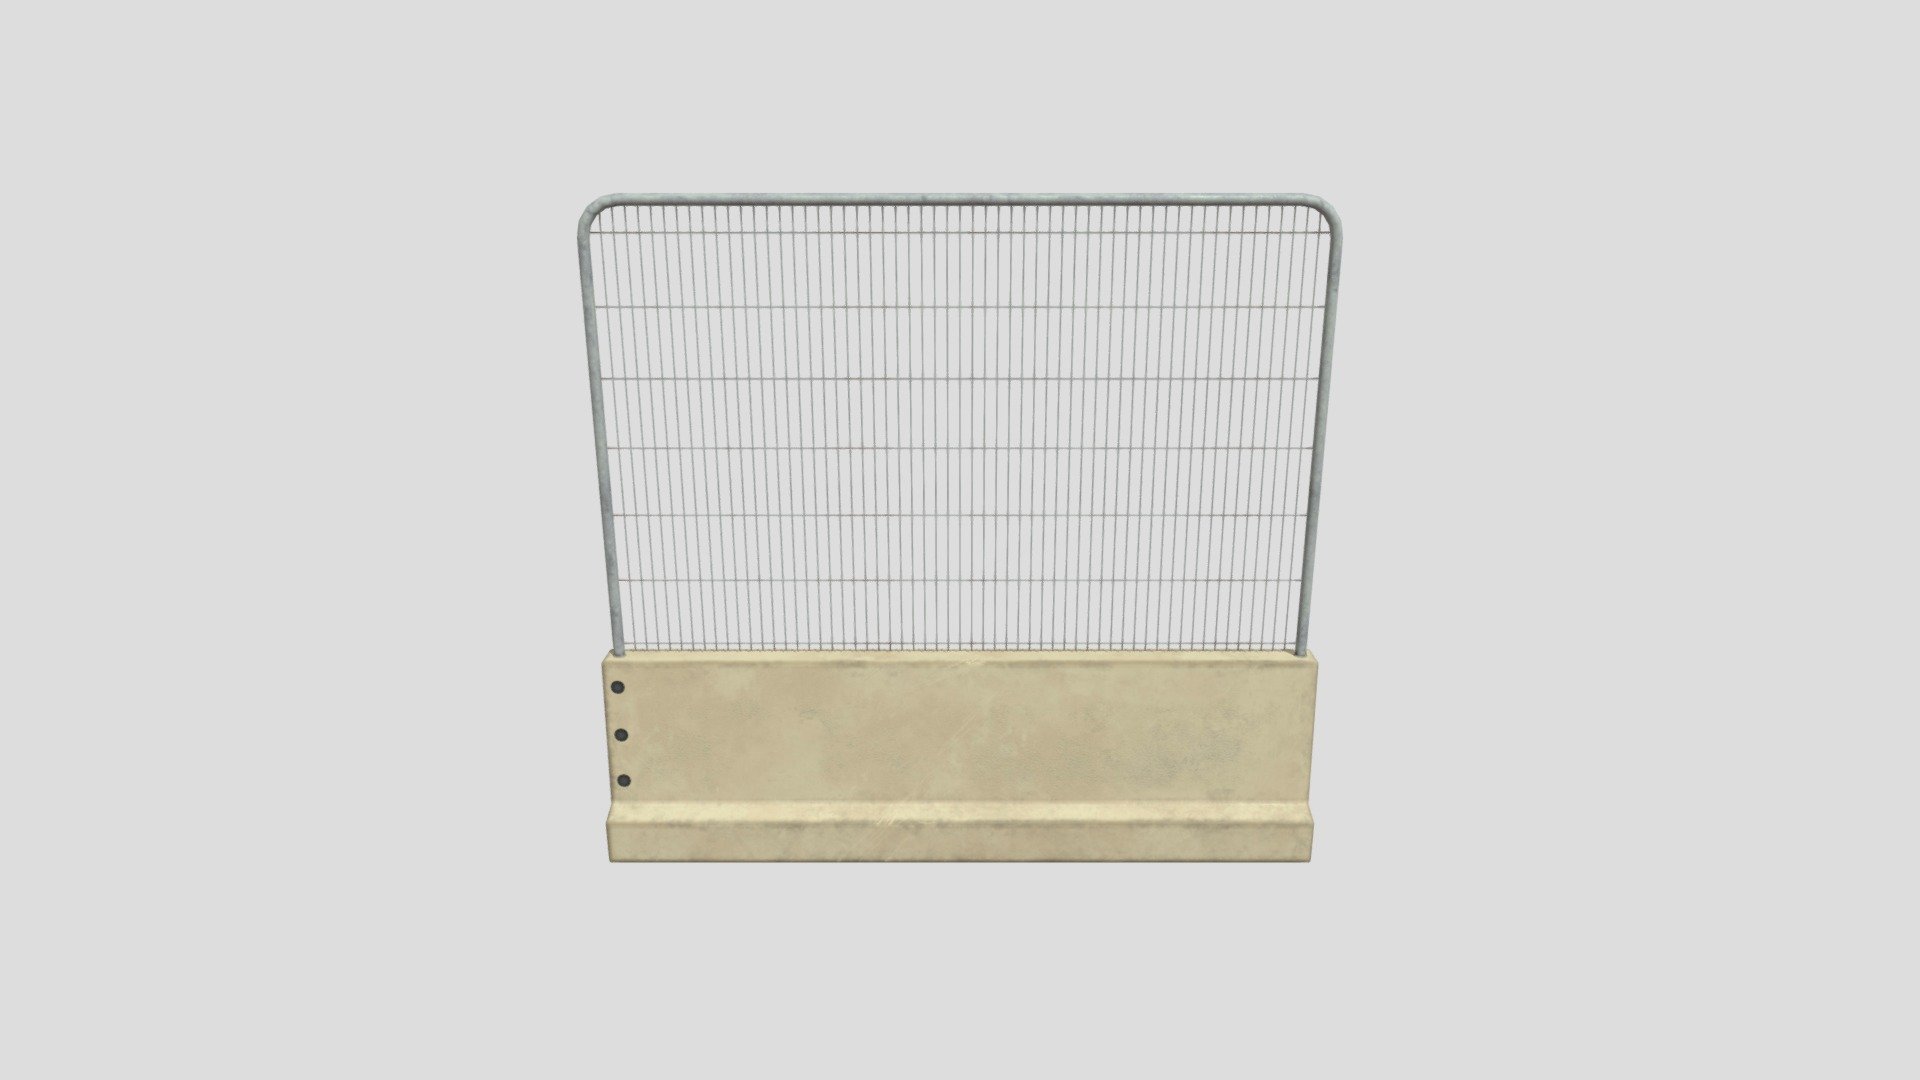 Professional, high quality 3d model of fence ready to use in your visualizations with textures and materials included 3d model